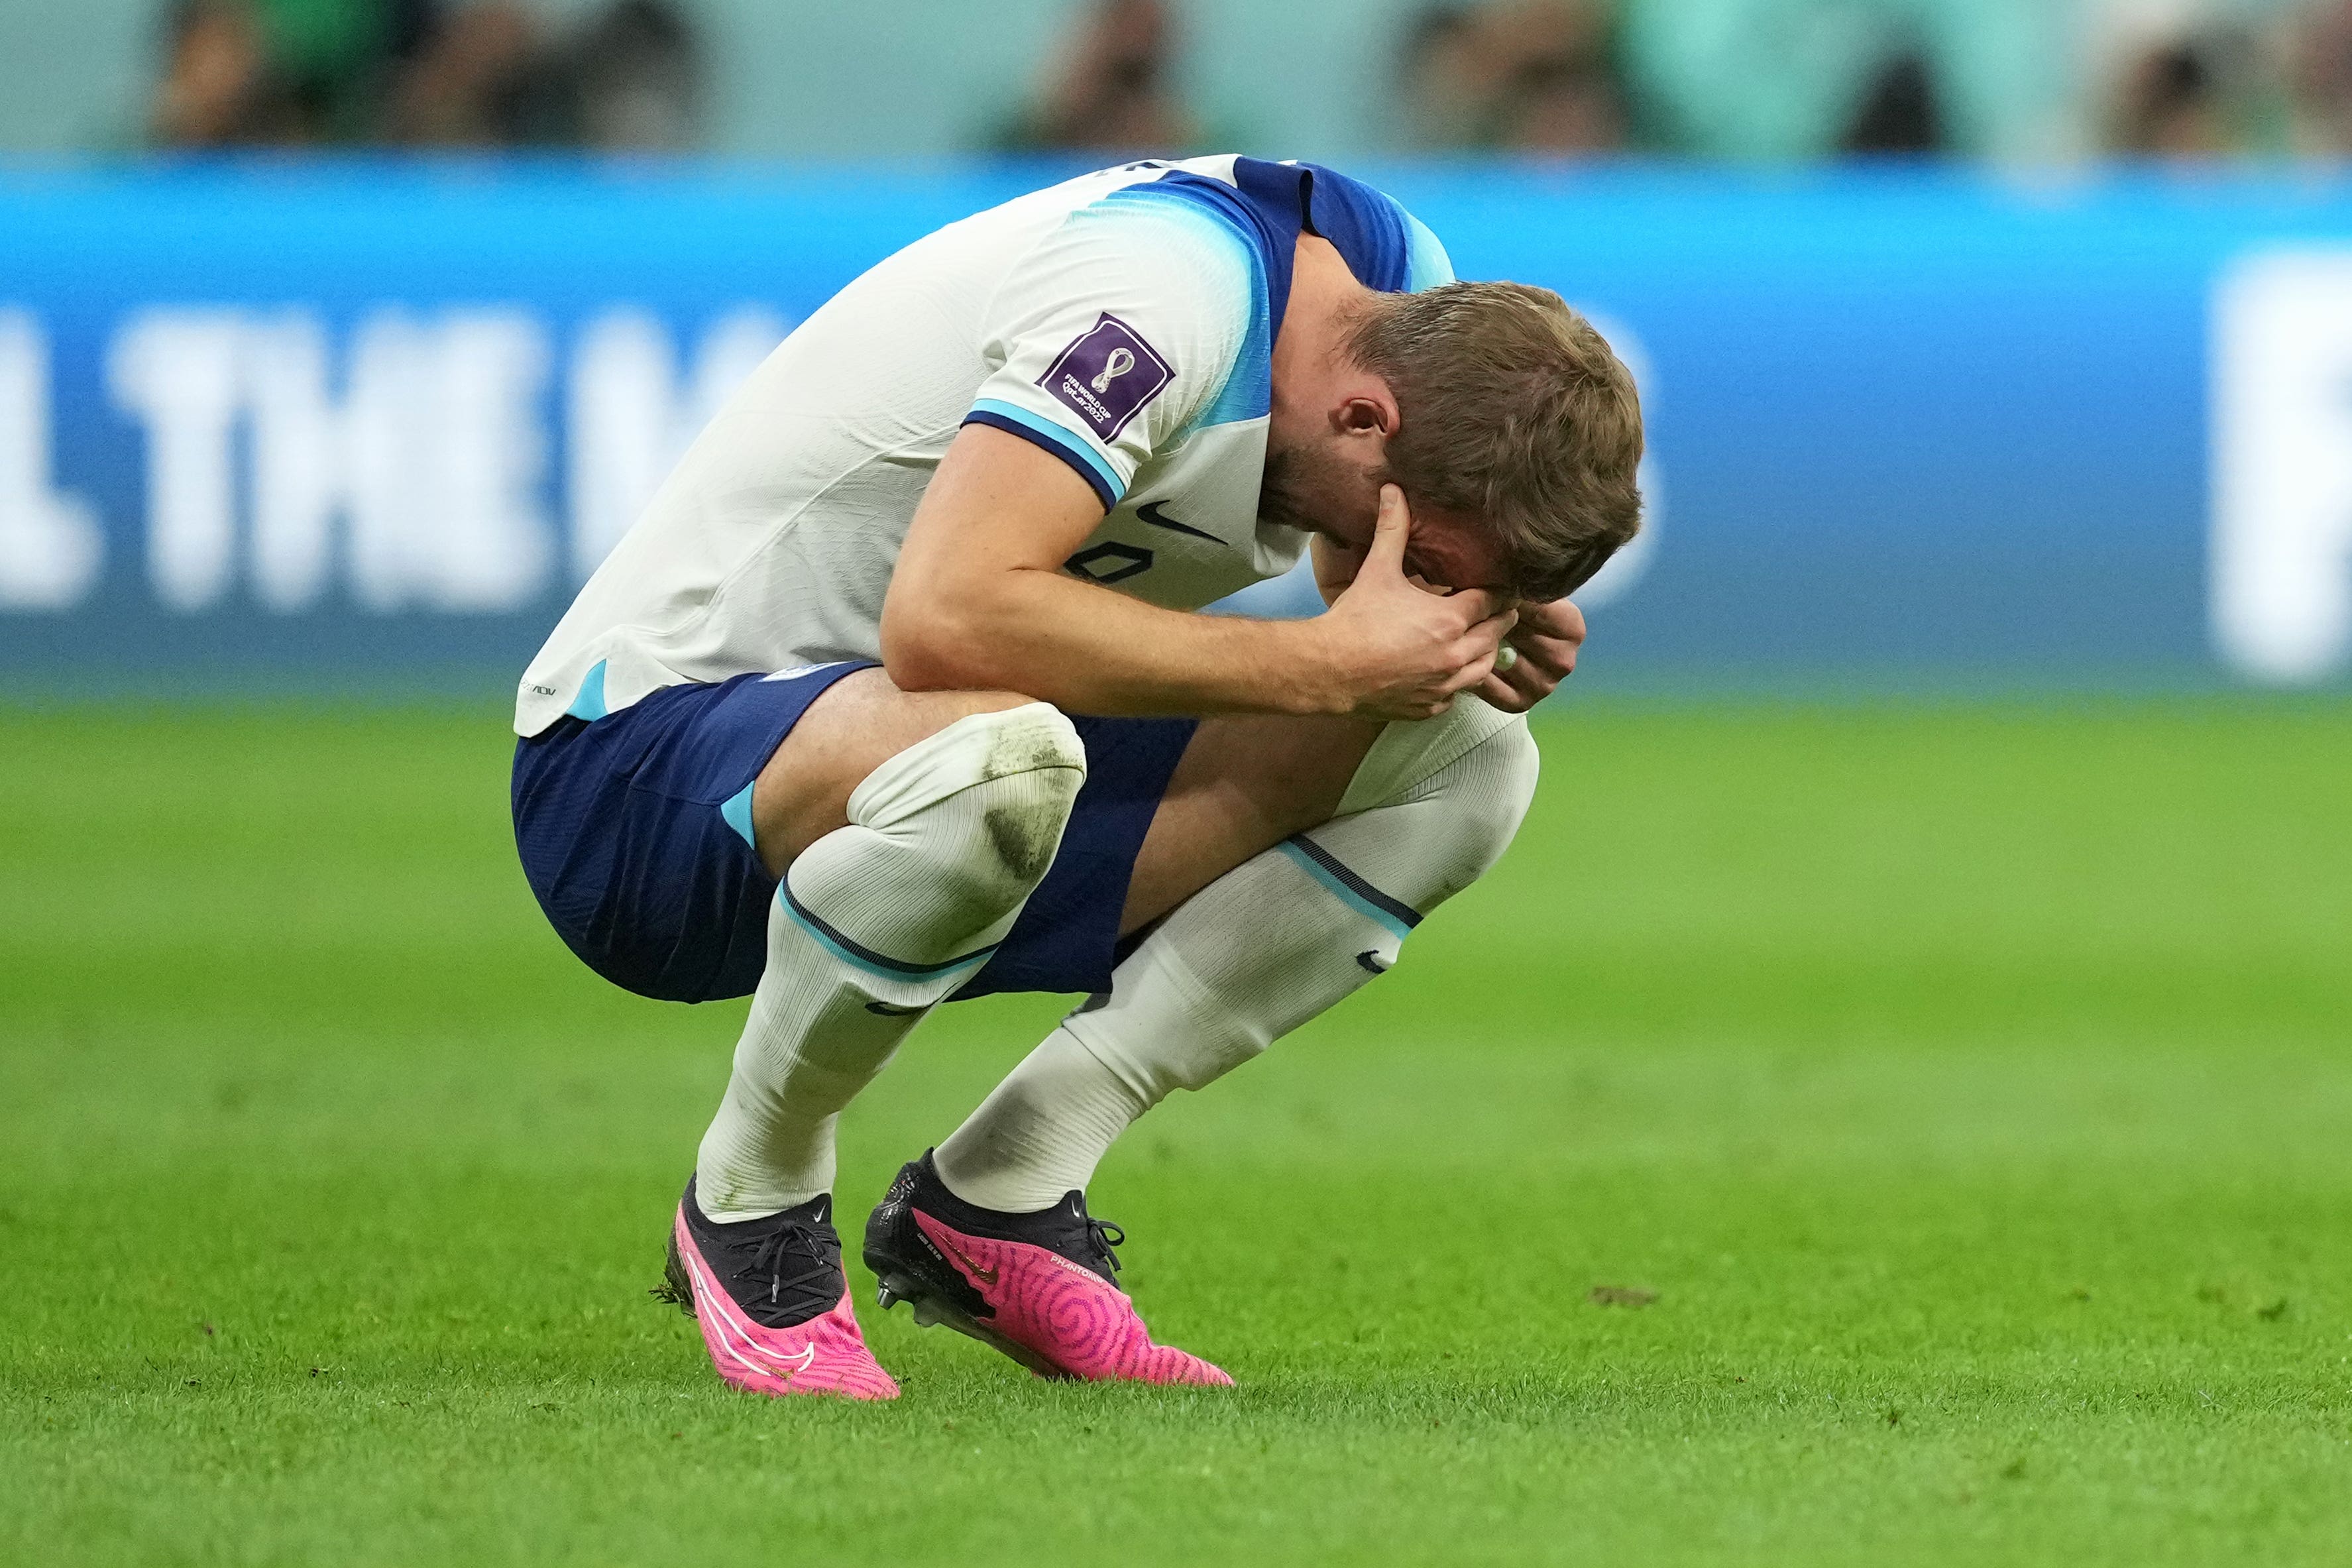 England quarter-final against France was identified as the most problematic game